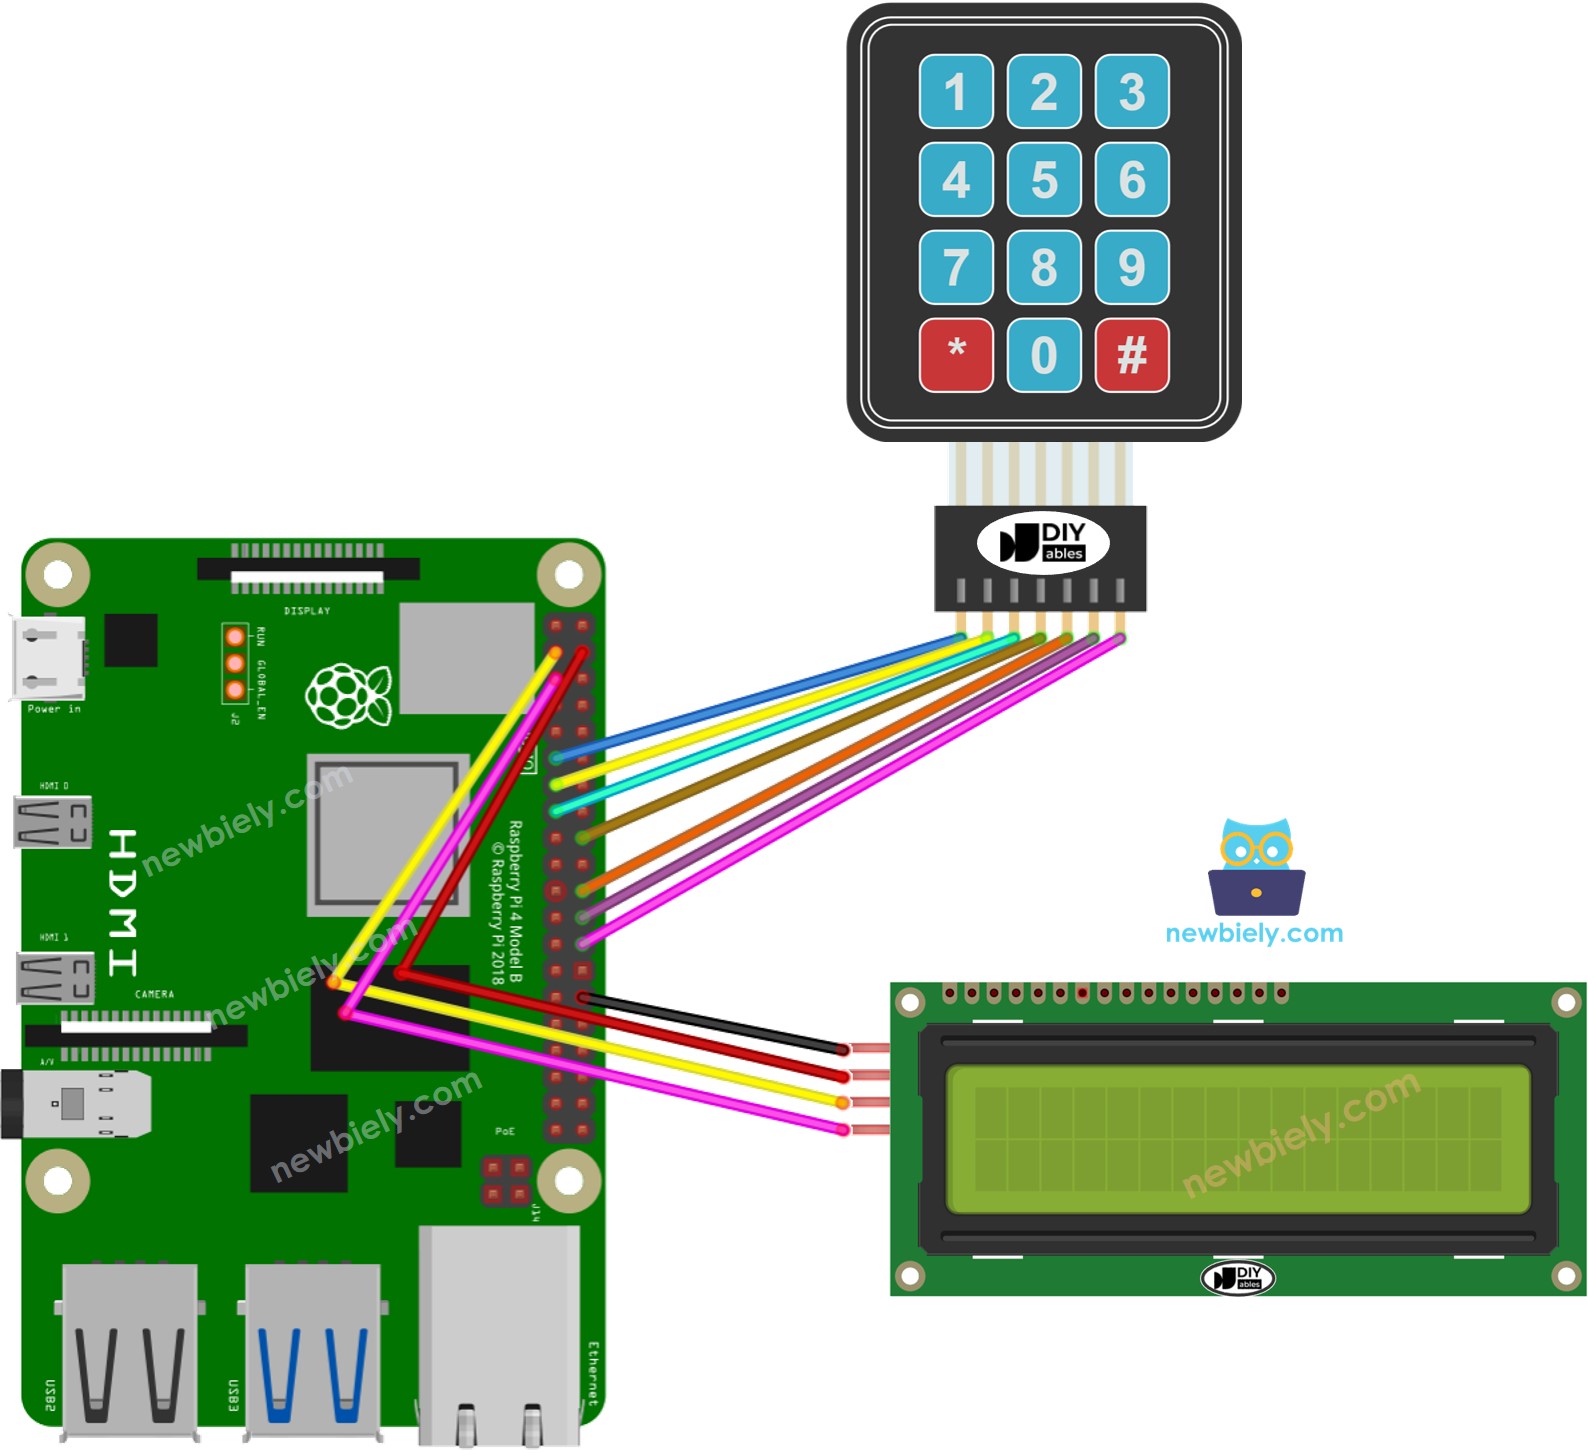 The wiring diagram between Raspberry Pi and Keypad LCD